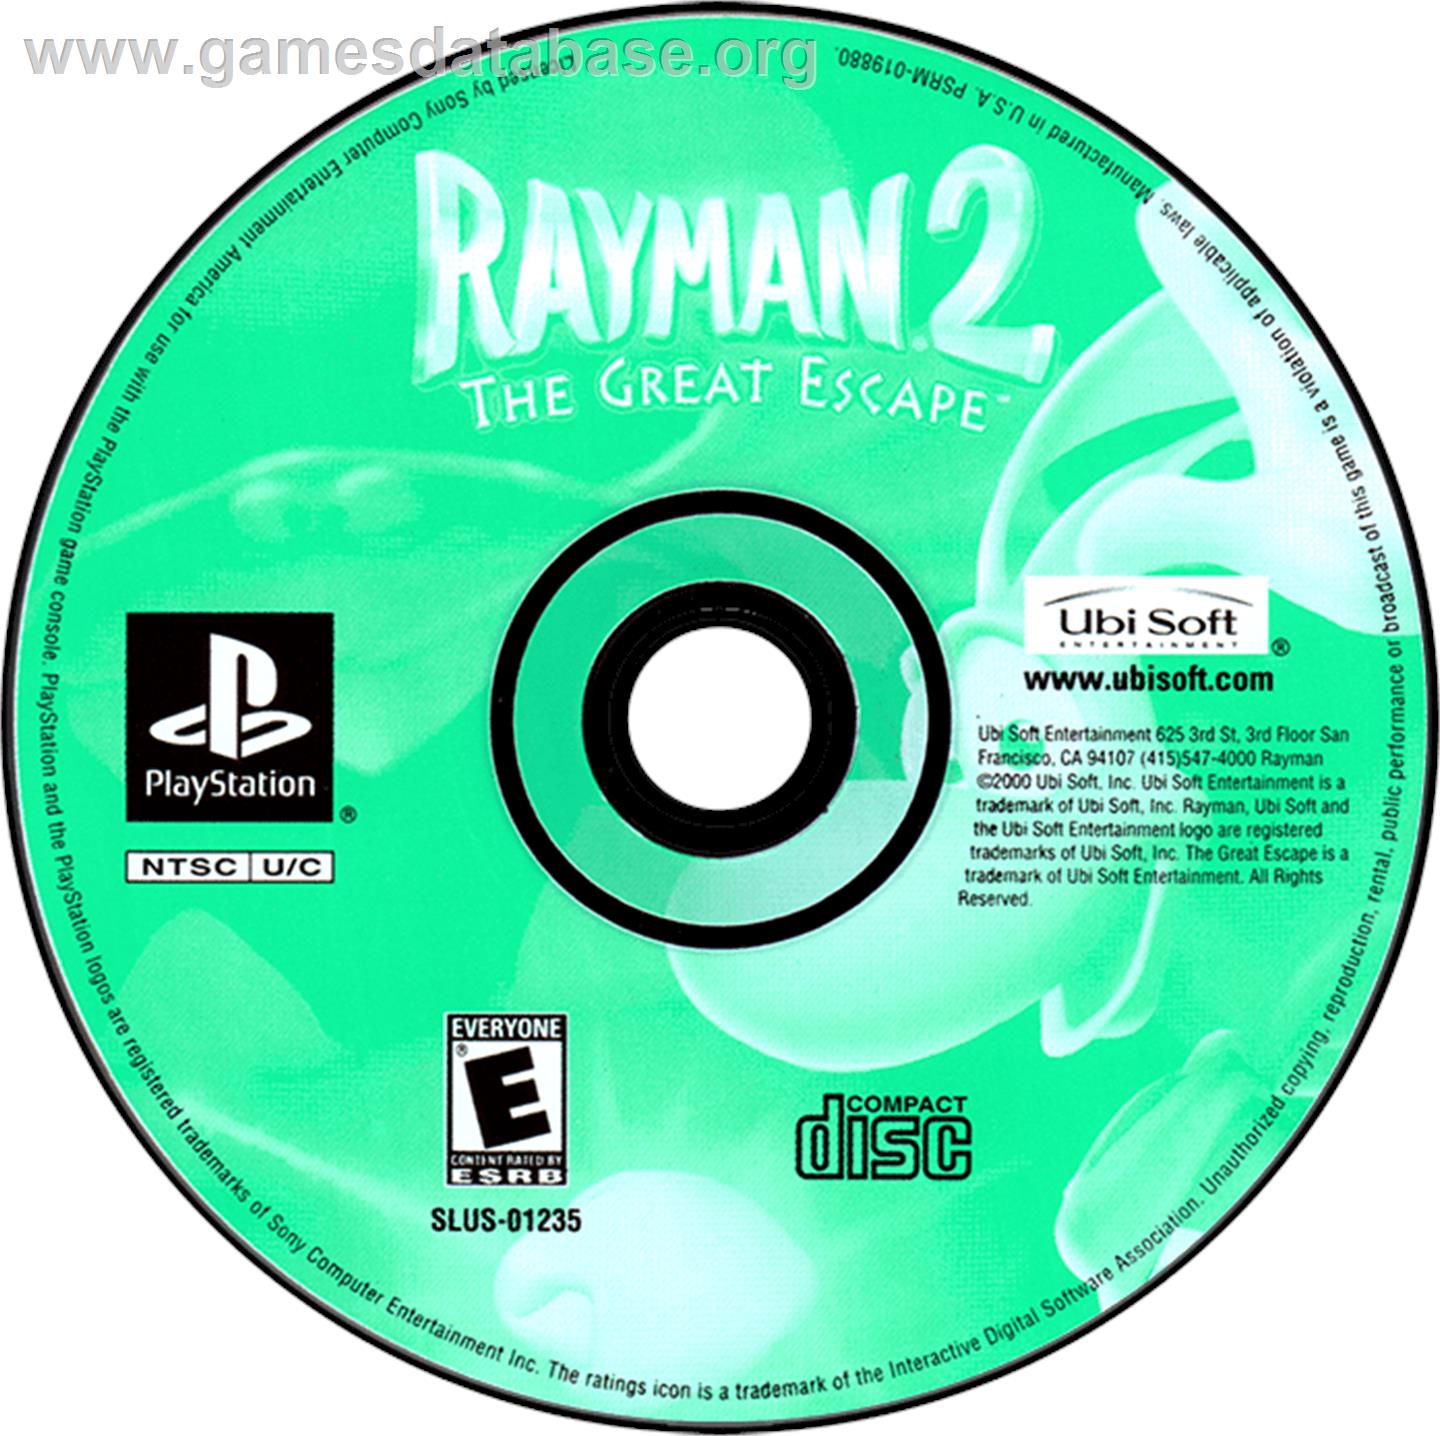 Rayman 2: The Great Escape - Sony Playstation - Artwork - Disc